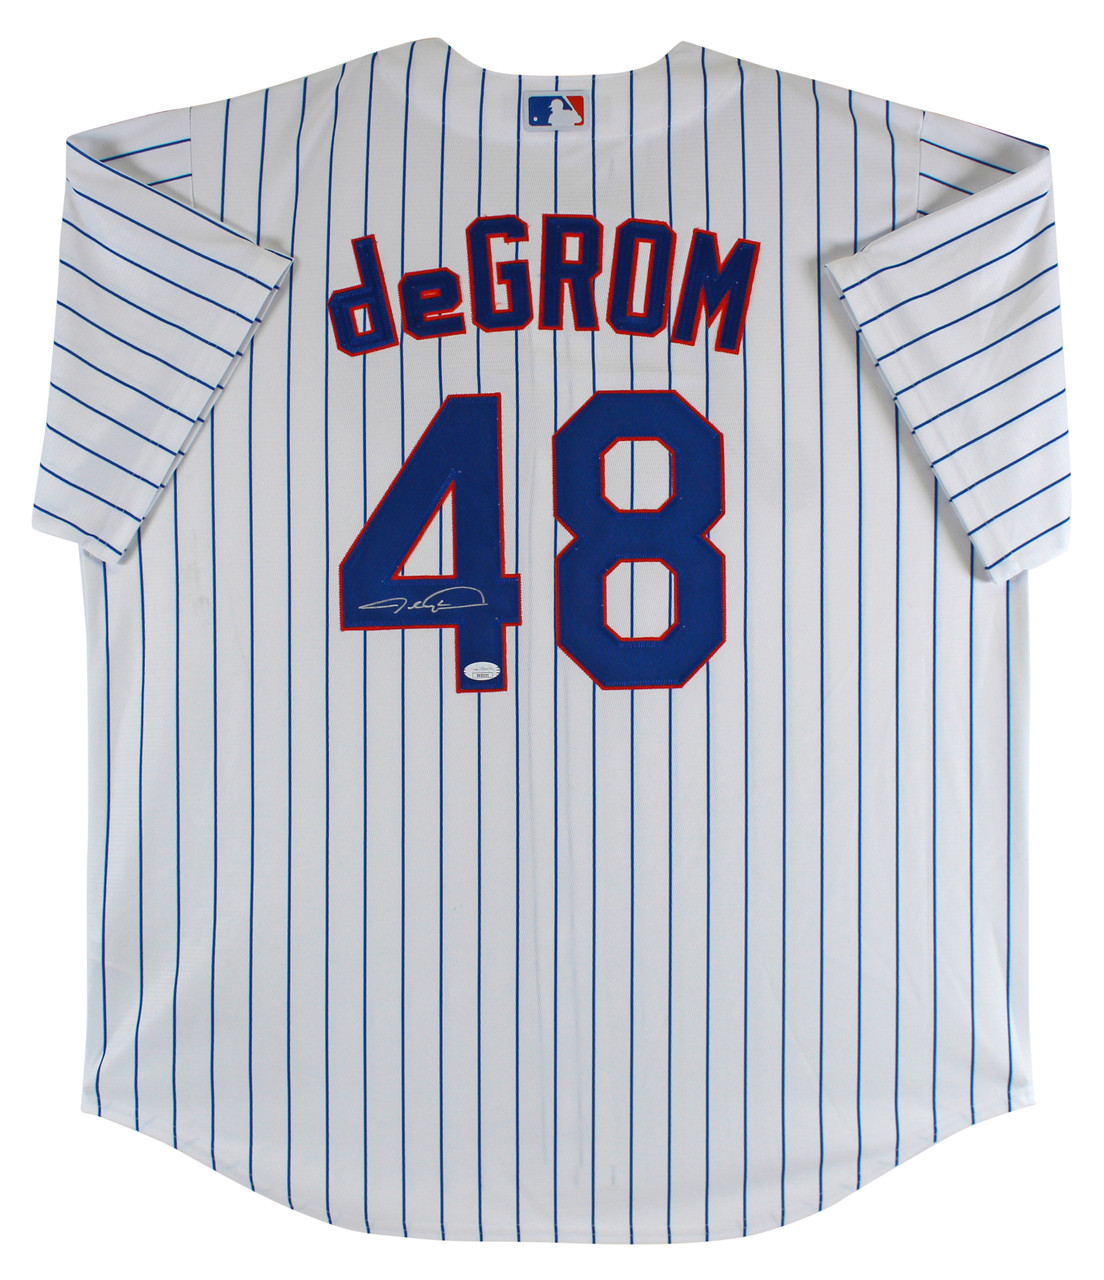 Jacob deGrom Black New York Mets Autographed Nike Authentic Jersey